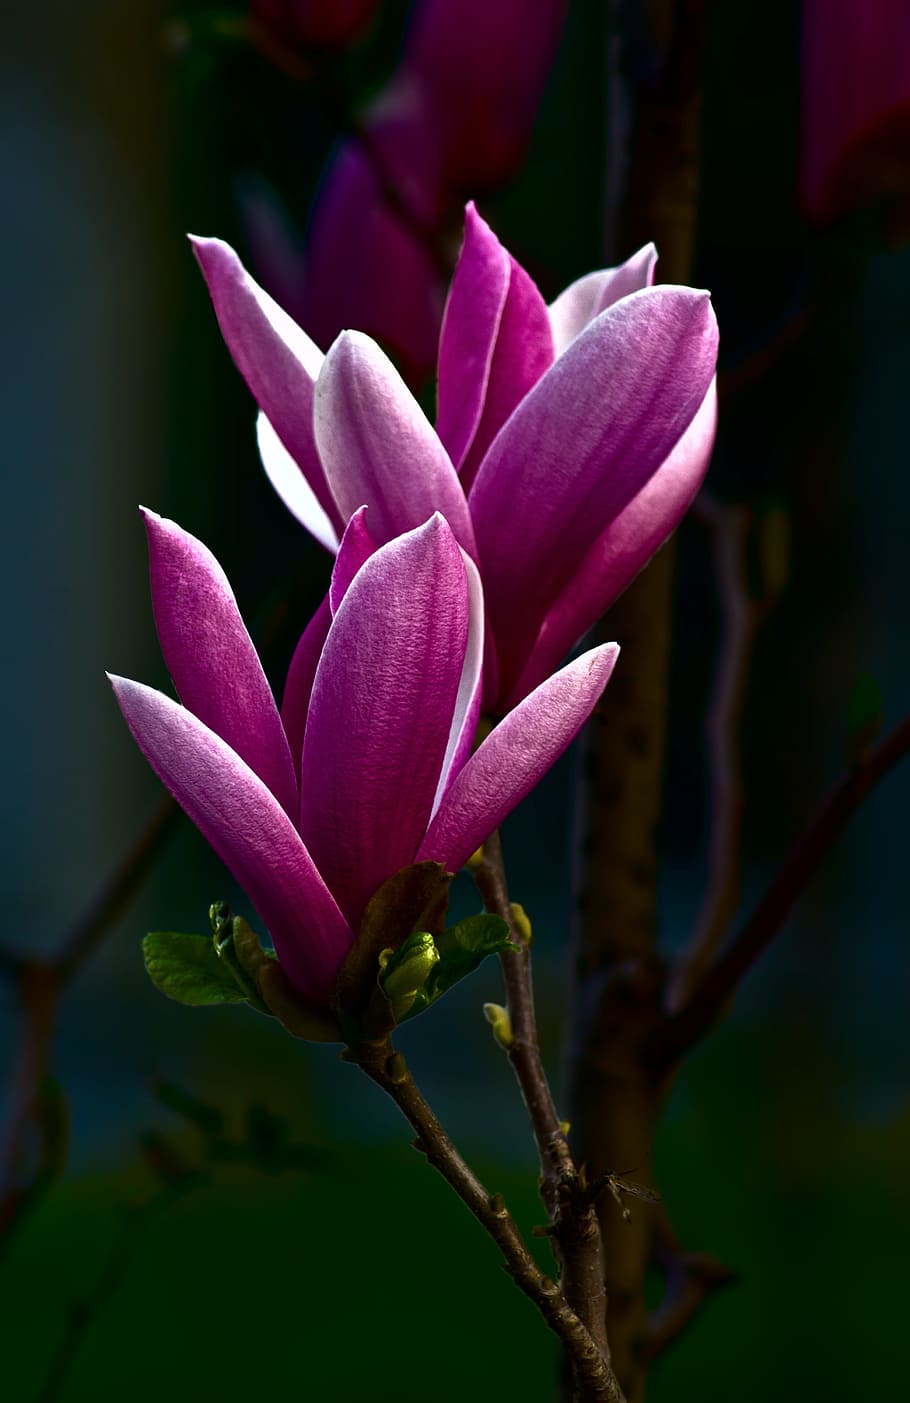 3840x800px | free download | HD wallpaper: selective focus photography of  purple Magnolia flower, beautiful | Wallpaper Flare